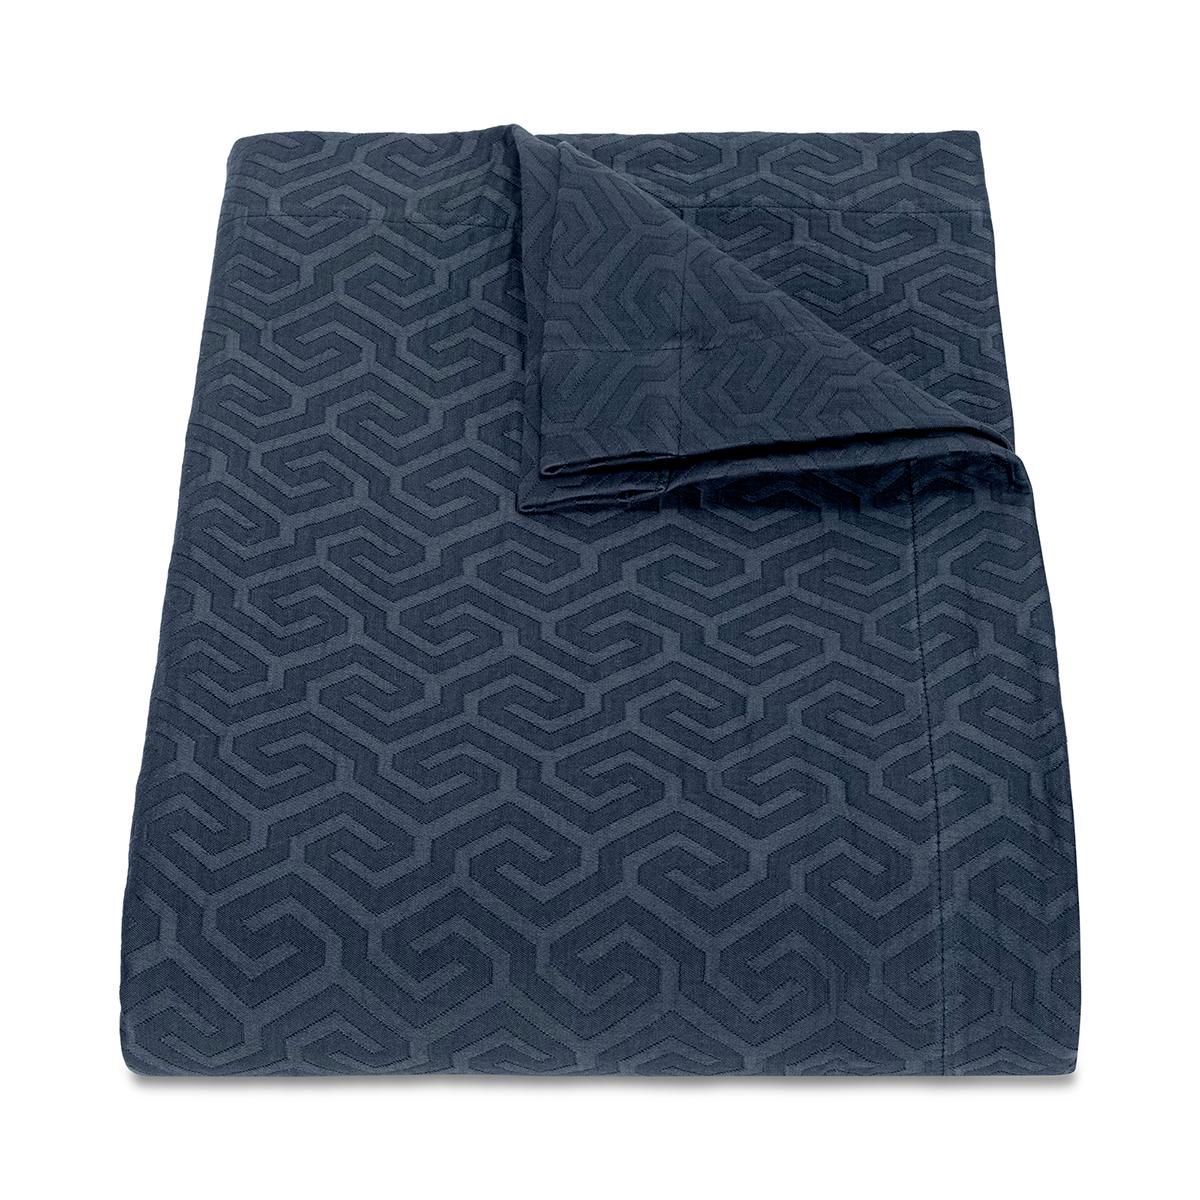 Athena Coverlet_Prussian Blue